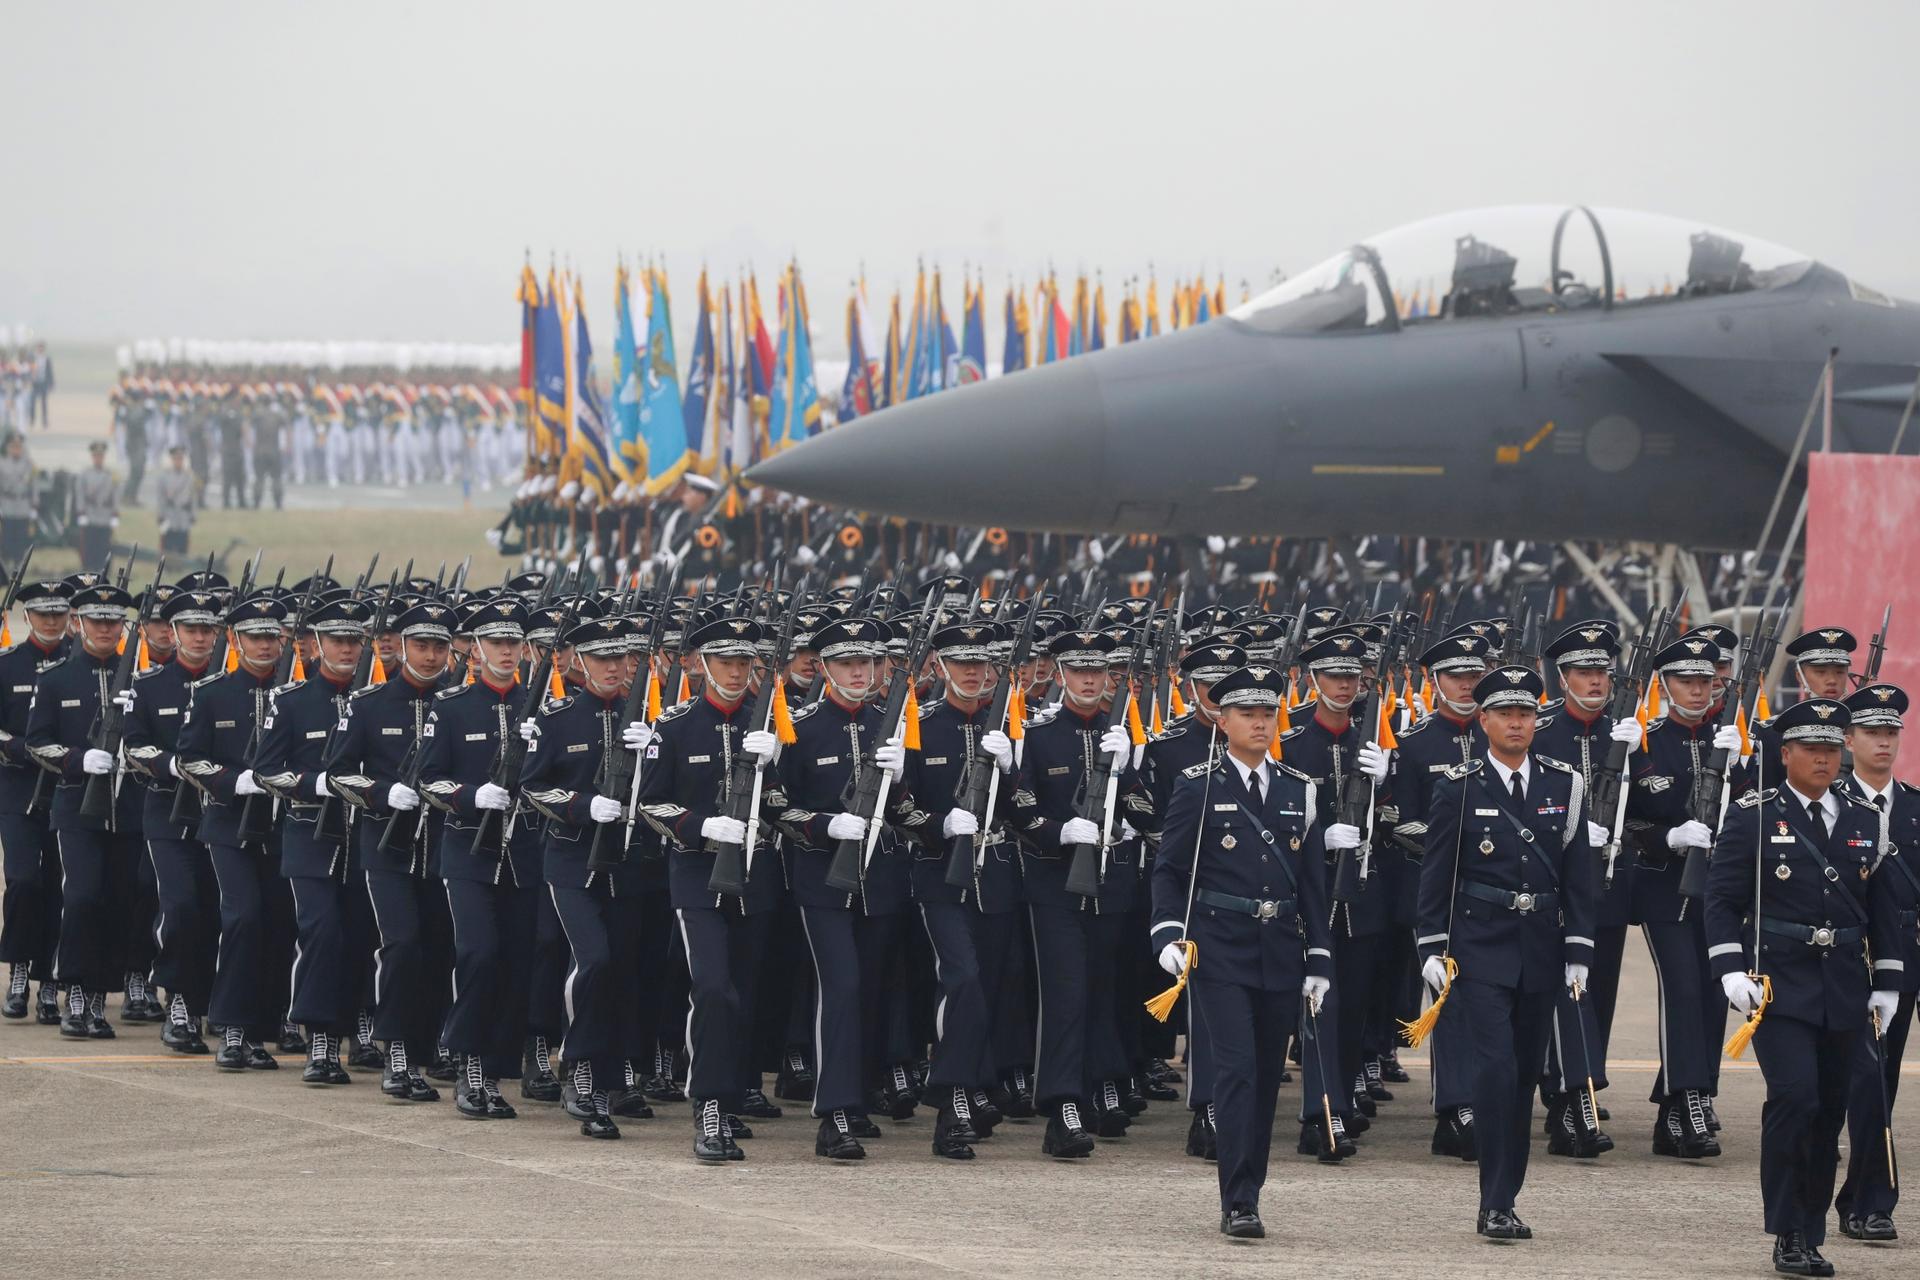 South Korean Army soldiers in black uniforms participate in a ceremony to mark the 71st anniversary of Armed Forces Day near military plane